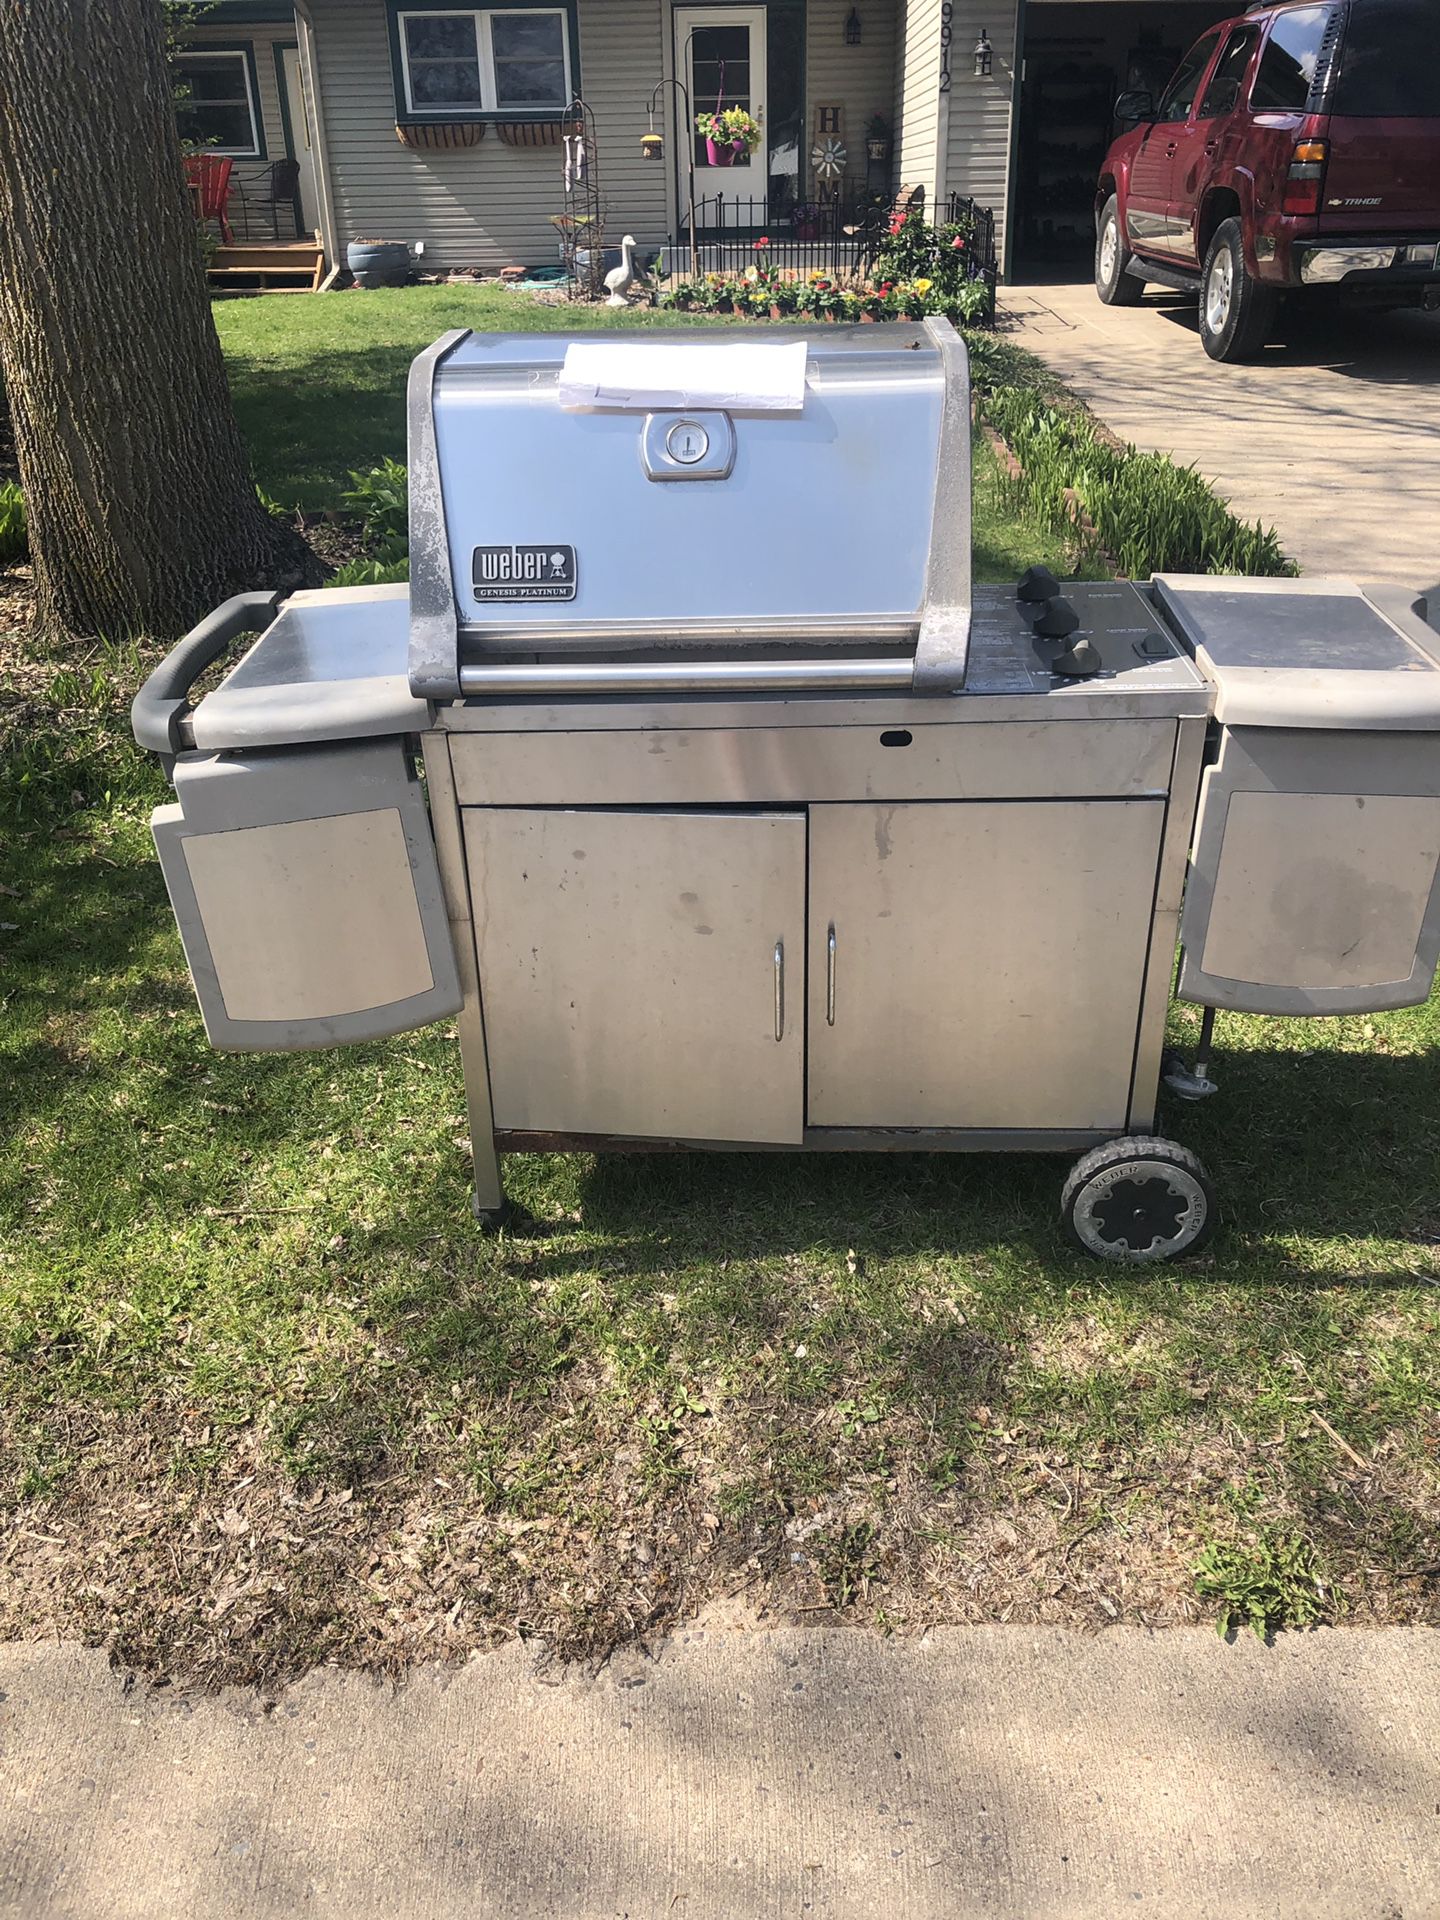 Free Weber grill works .